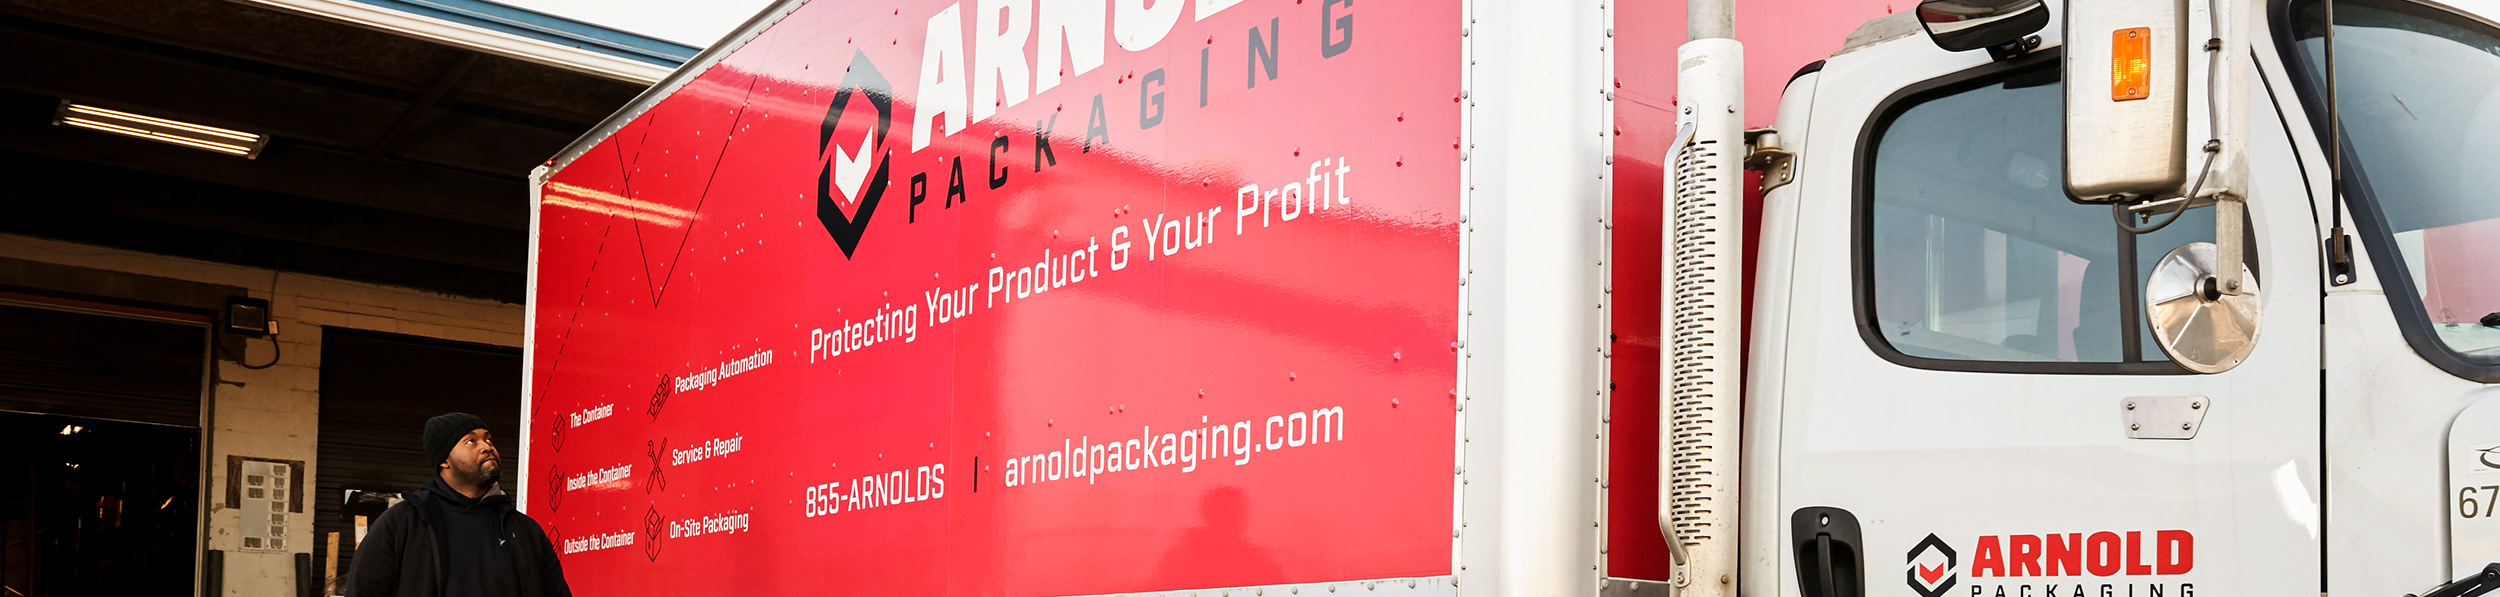 Arnold Packaging Truck